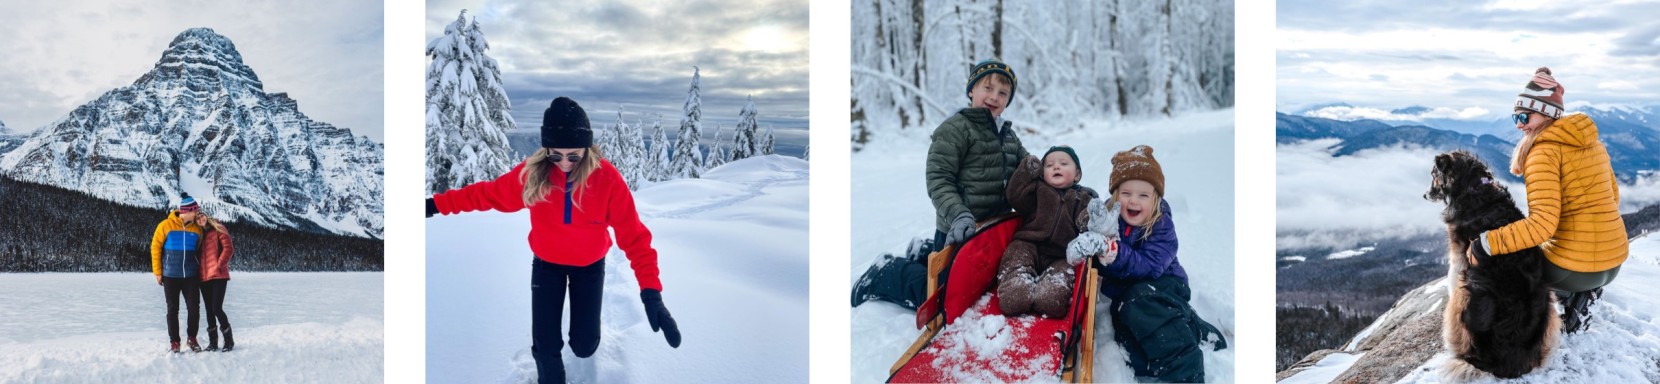 4 images of different people having fun outside in winter in various settings.